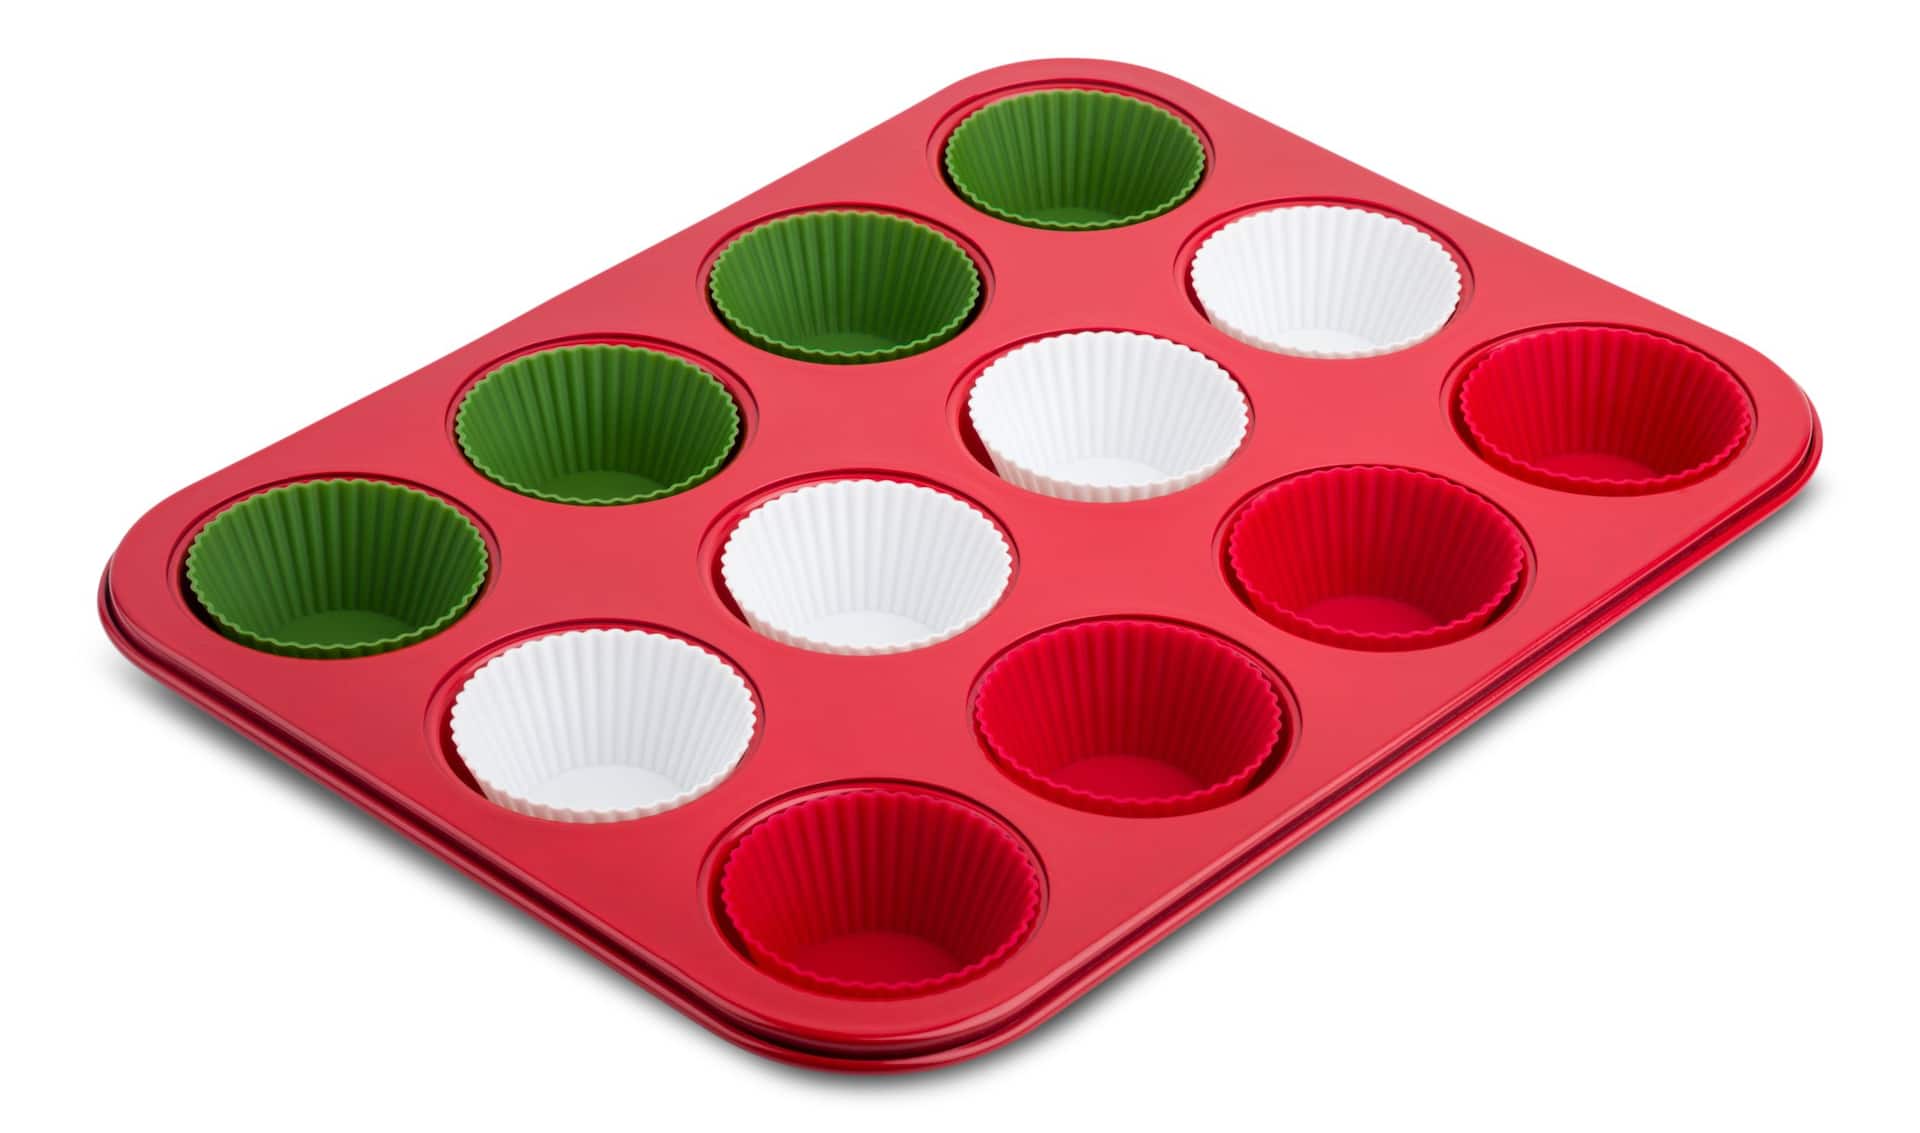 4 Pk Threshold Leaf Shaped Silicone Mini Muffin Pan 24 Muffins Each Tray  Red